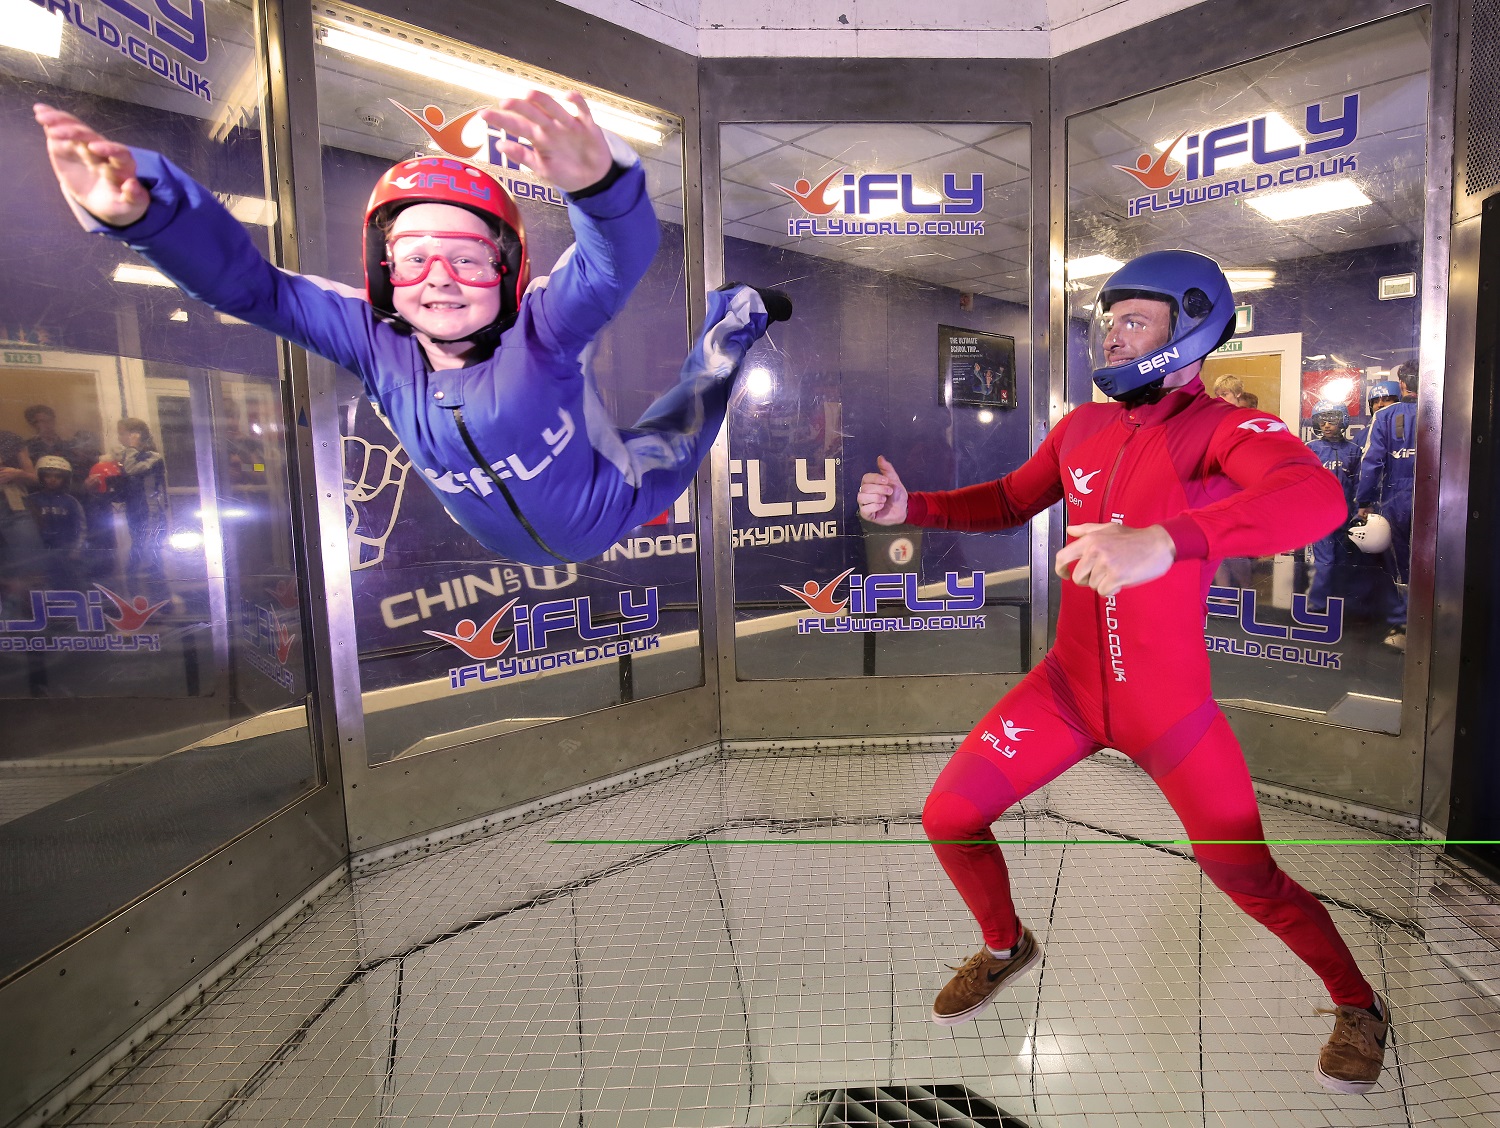 At iFly’s Milton Keynes location the wind speed of the indoor skydiving tunnels is regulated by four powerful and reliable variable speed drives from Mitsubishi Electric. [Source: iFLY]